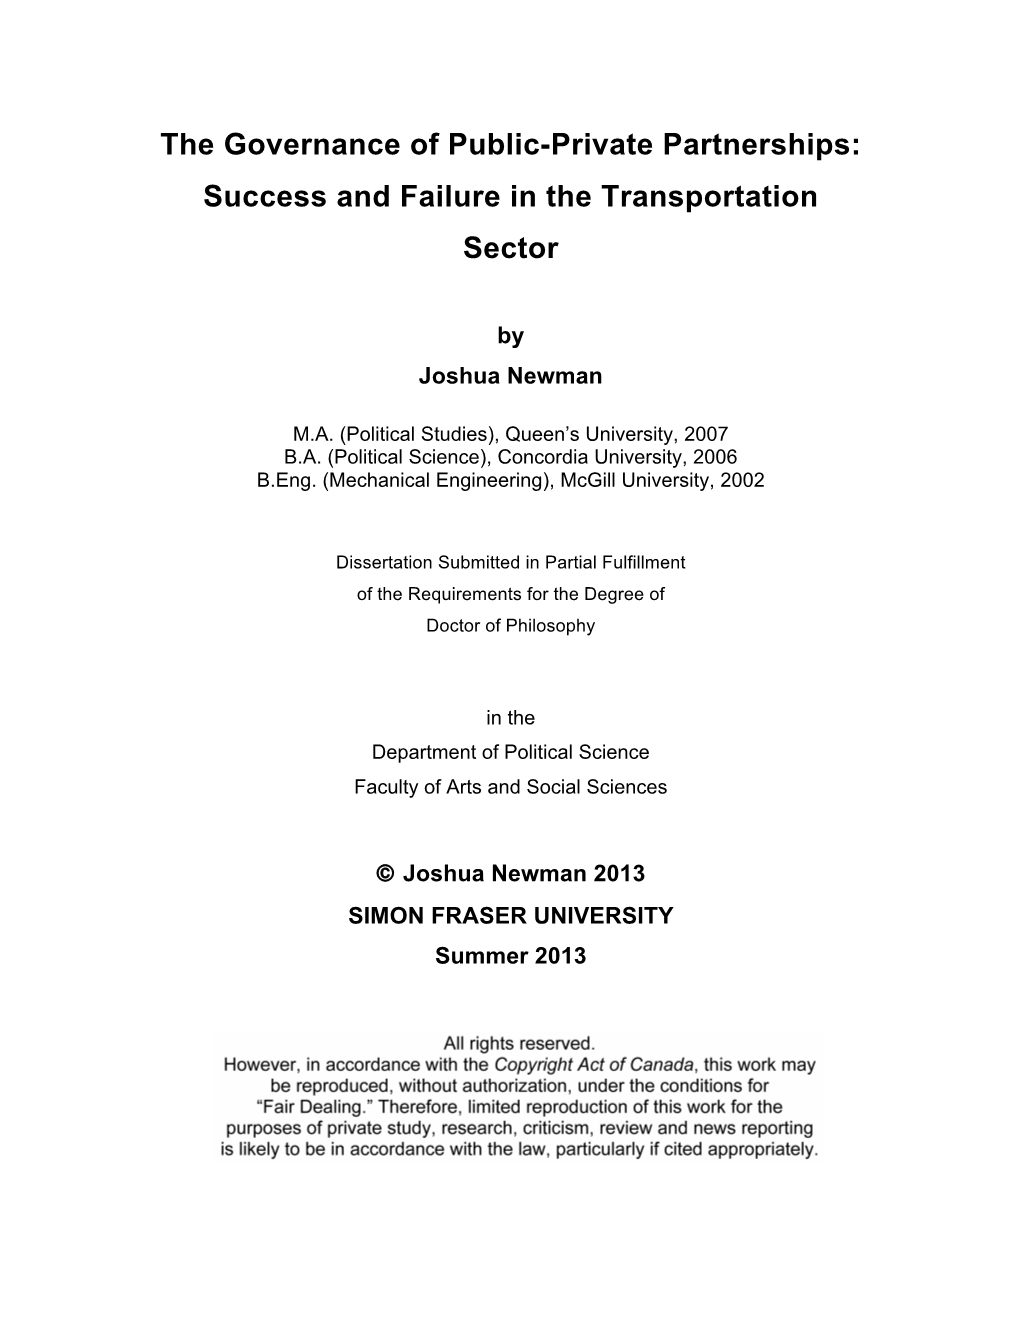 The Governance of Public-Private Partnerships: Success and Failure in the Transportation Sector